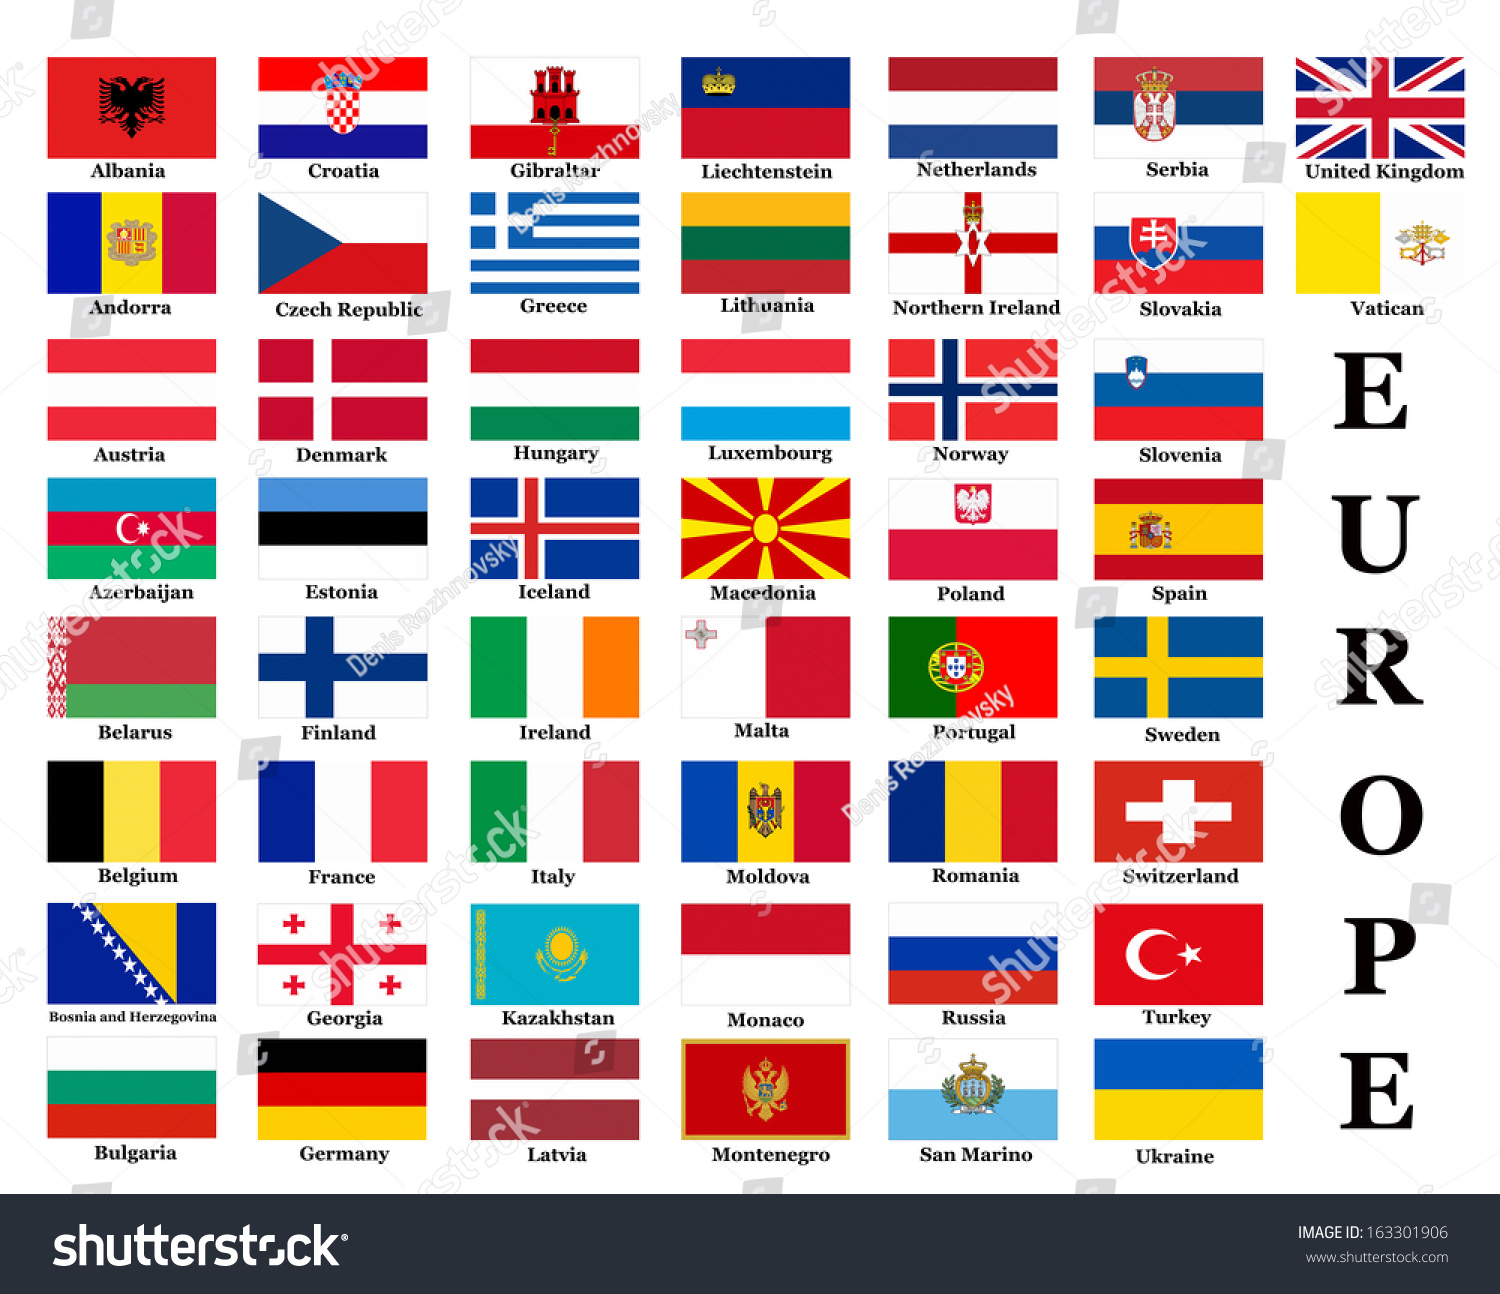 Image result for list of europe countries